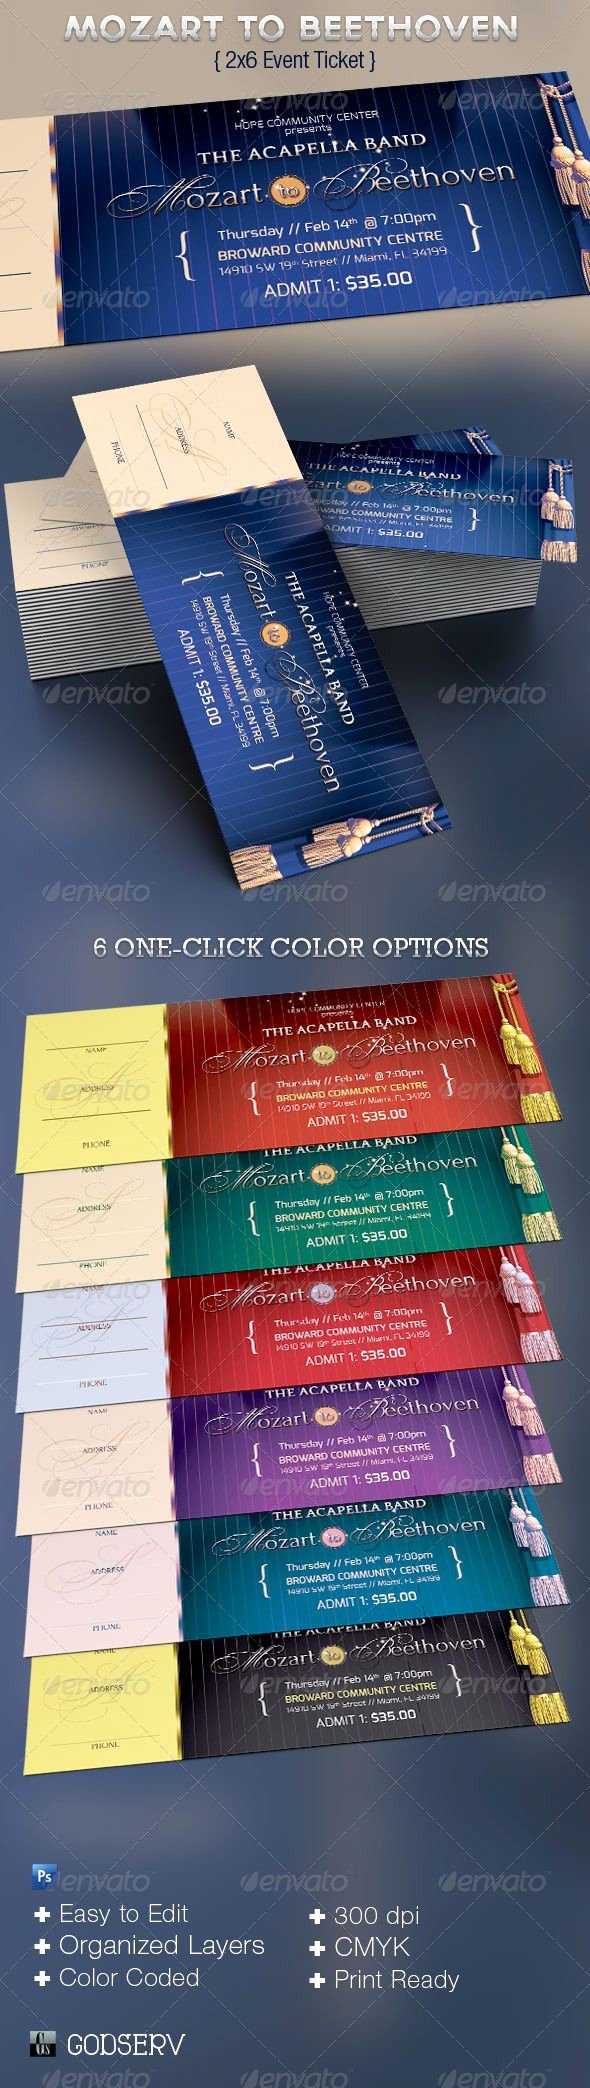 Event Ticket Template Photoshop Lovely Best 20 Ticket Template Ideas On Pinterest